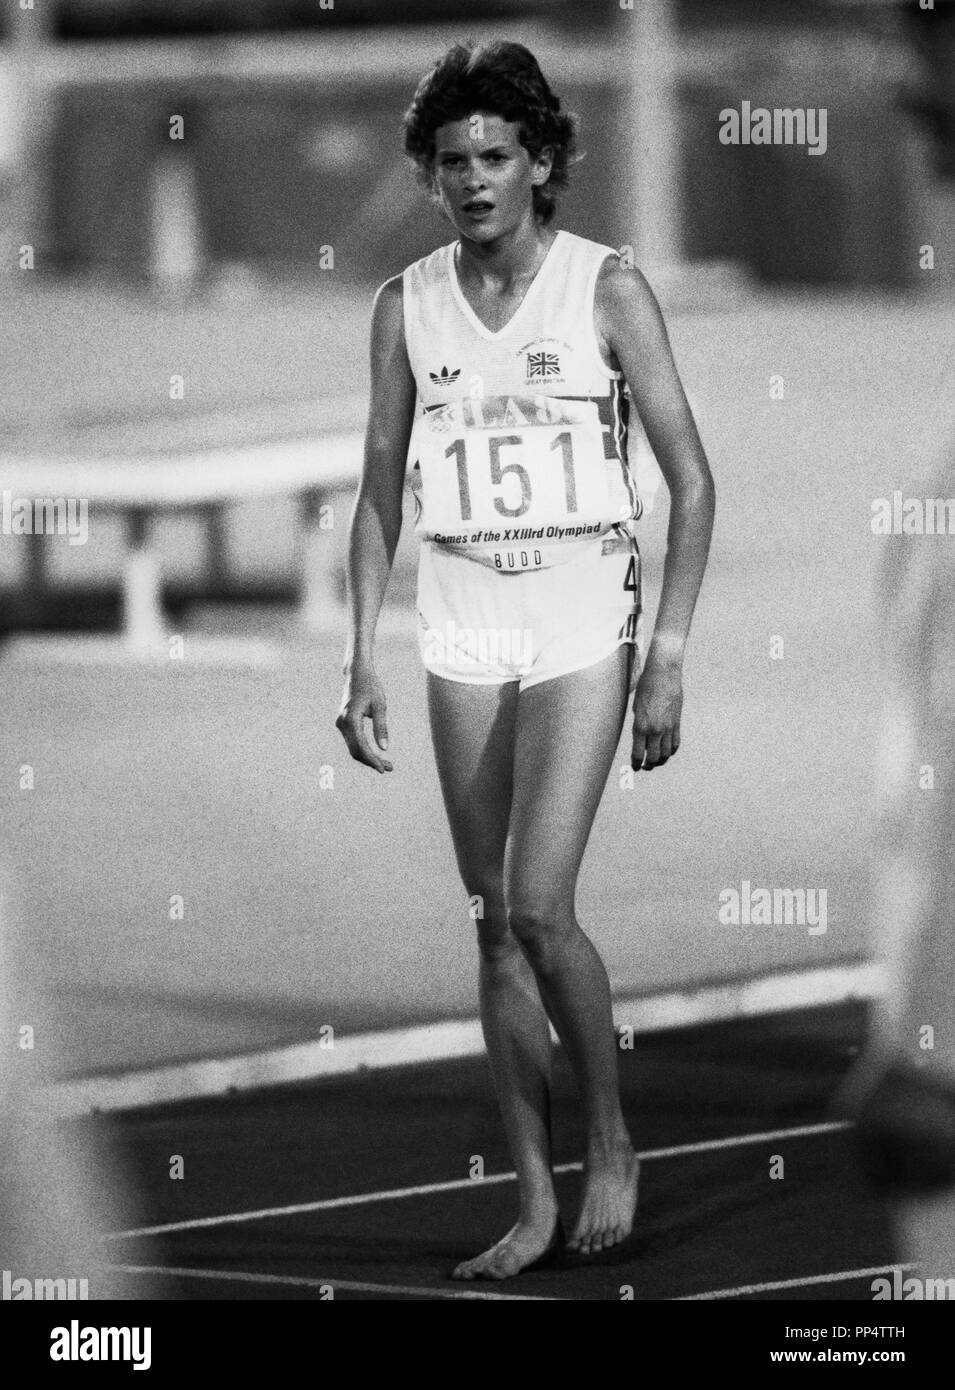 ZOLA BUDD track and field athlete born in South Africa compete for Great Britain in Olympics summer game LOs Angeles 1984 in  the 3000m run  barefoot Stock Photo